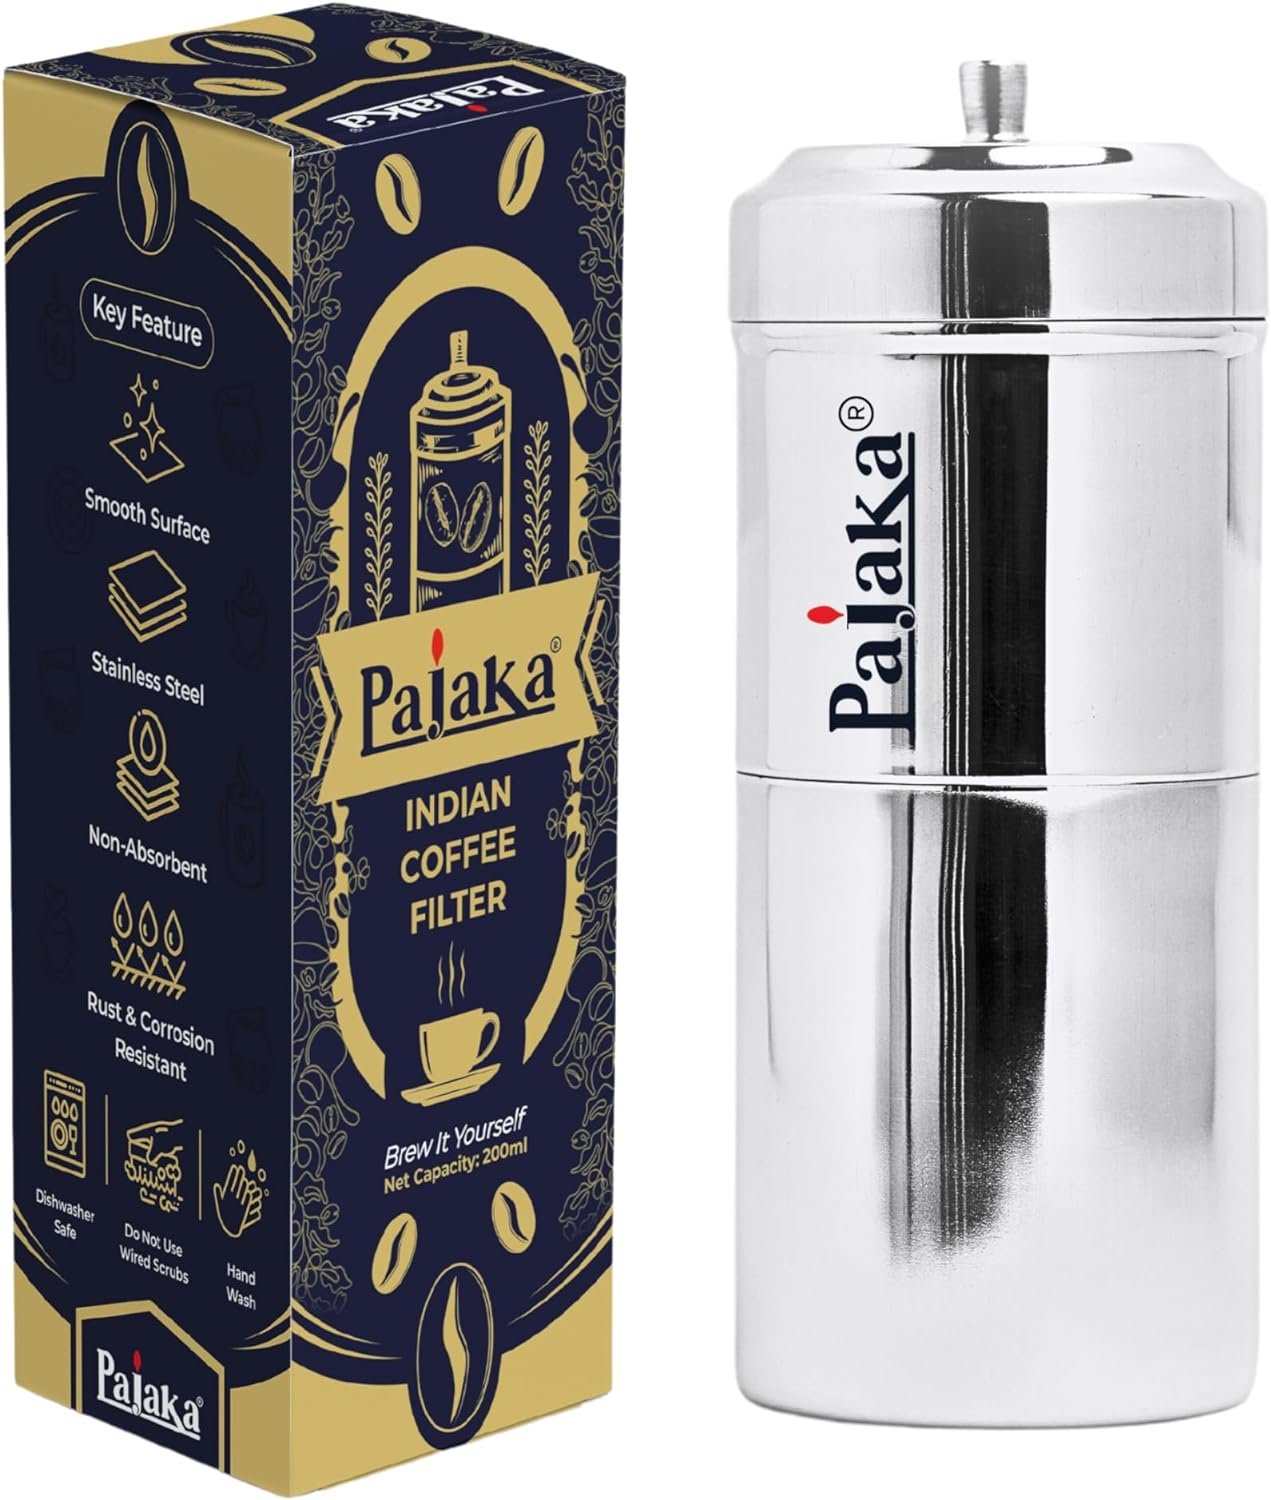 PAJAKA South Indian Filter Coffee Maker Review